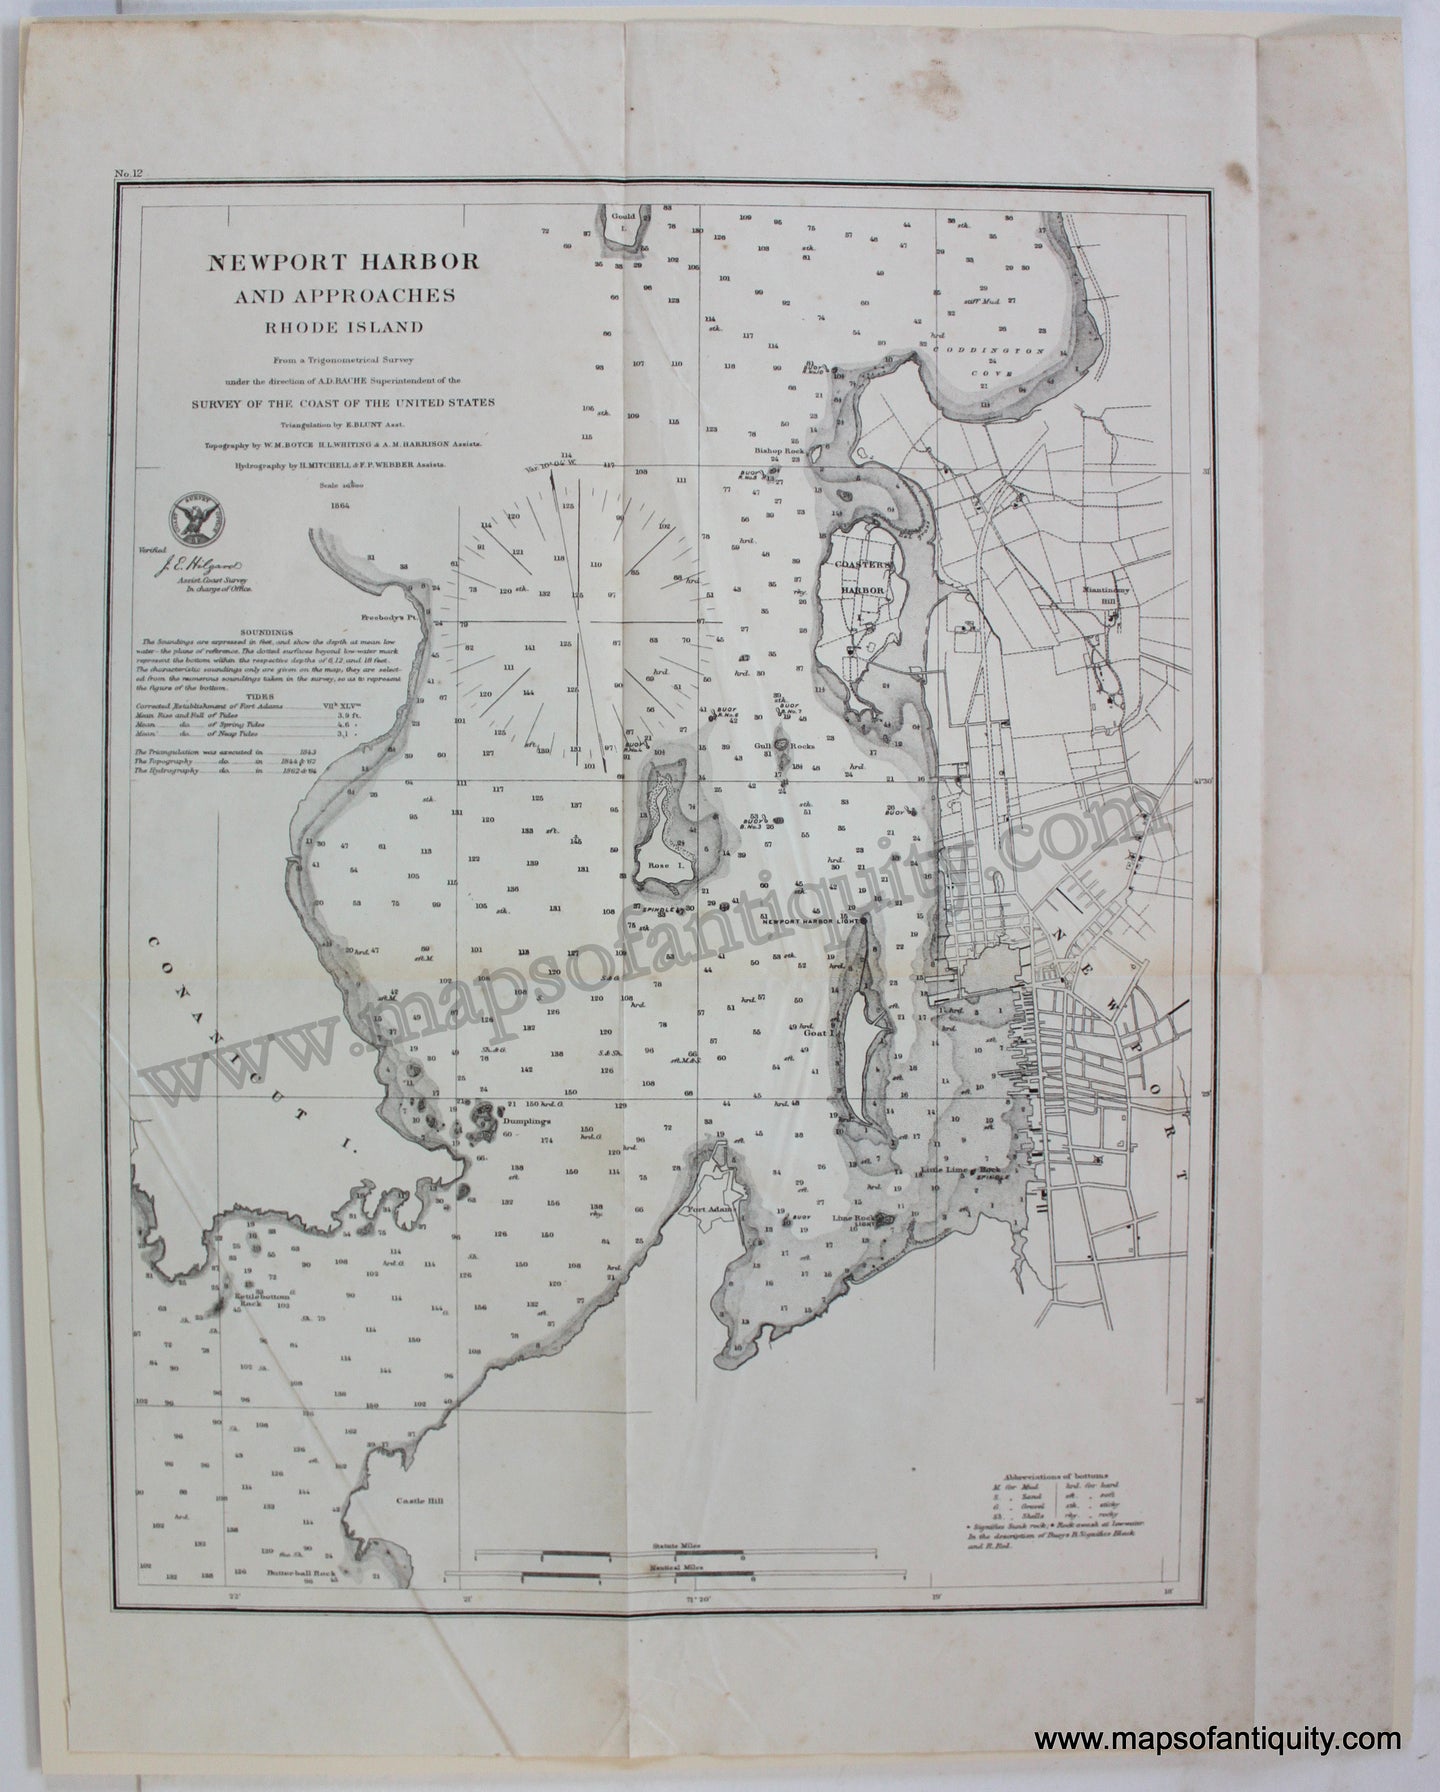 Antique-Black-and-White-Coastal-Chart-Newport-Harbor-and-Approaches-Rhode-Island-1864-U.S.-Coast-&-Geodetic-Survey-Northeast-Rhode-Island-1800s-19th-century-Maps-of-Antiquity